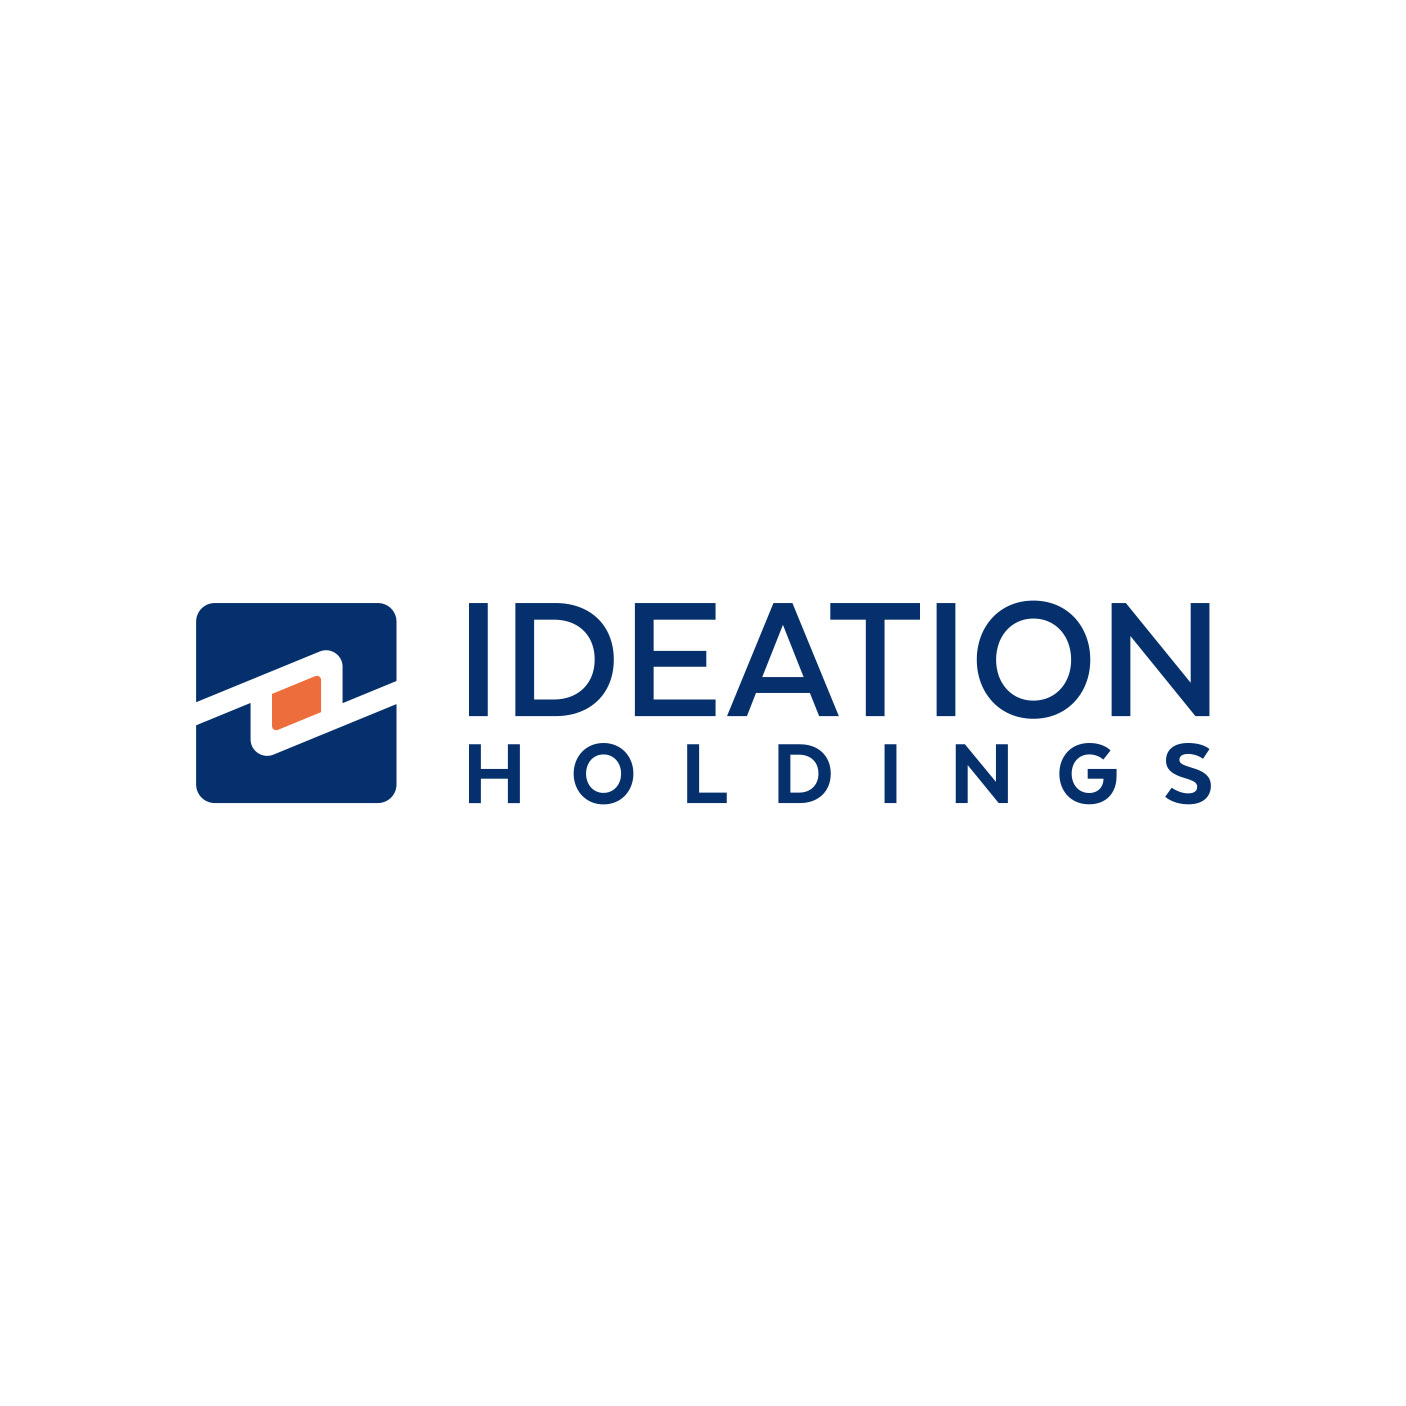 Brand mark and full logo for Ideation Holdings.